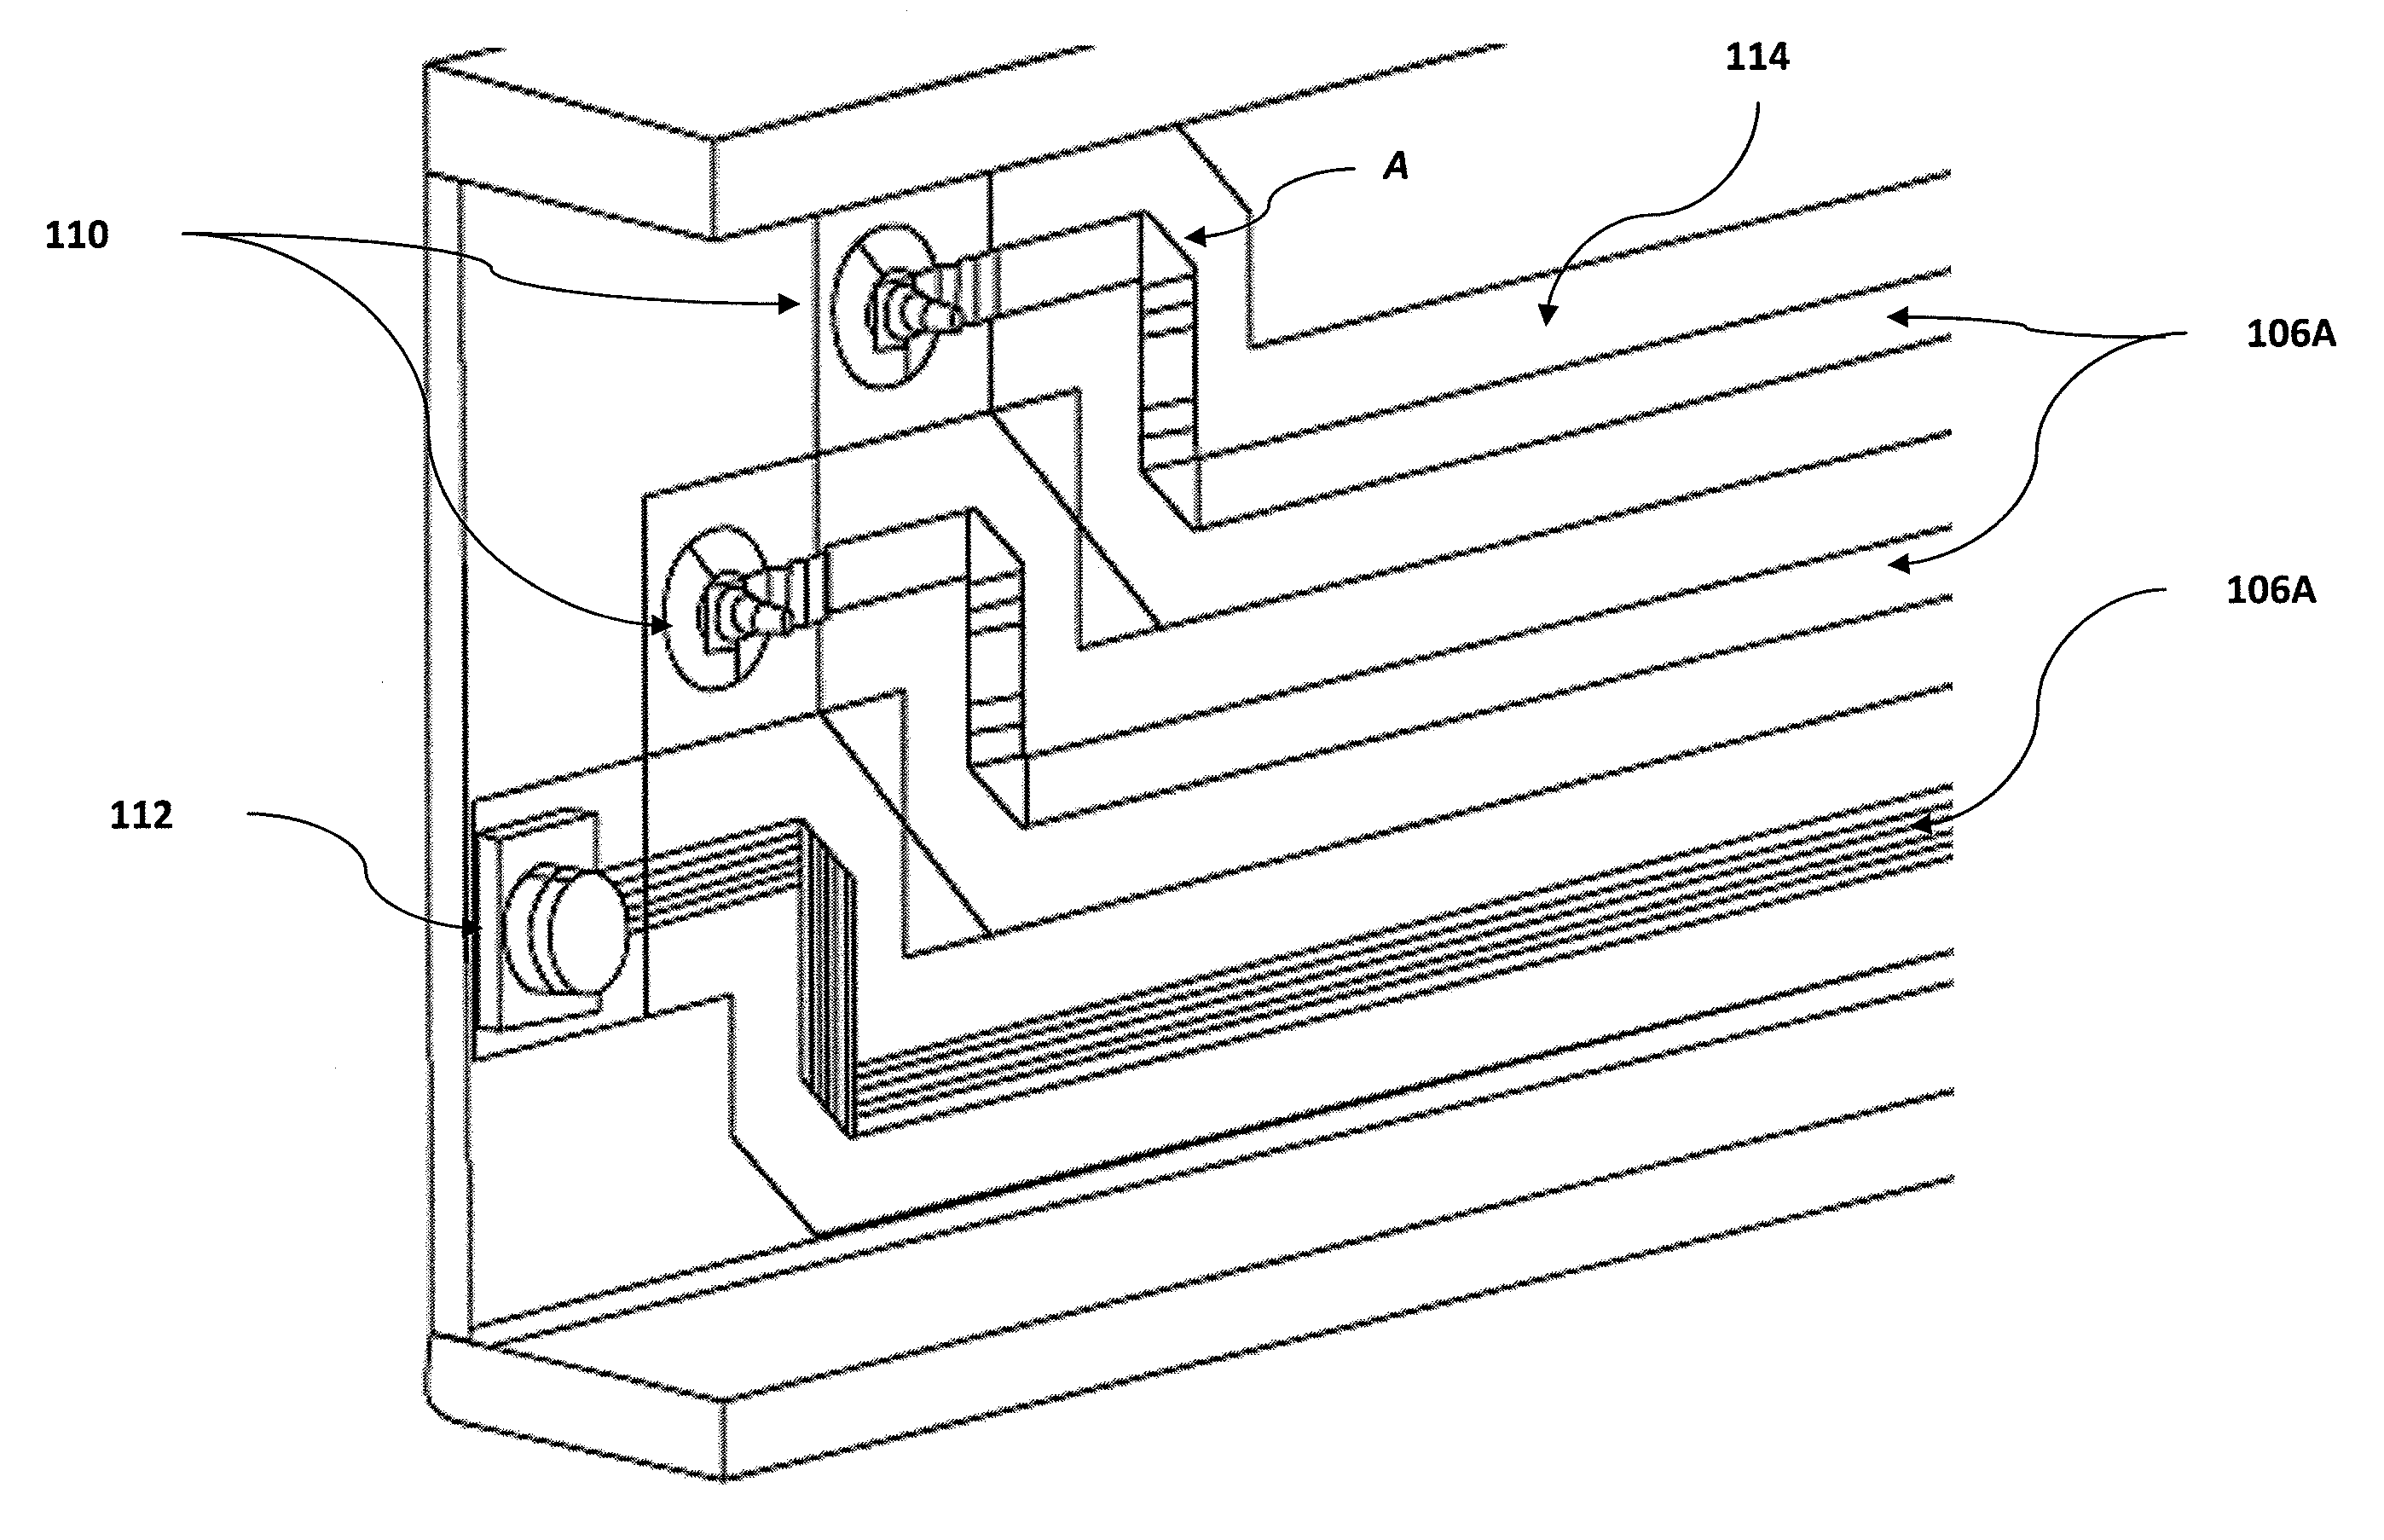 Apparatus and method for an aircraft conductor sandwich assembly embedded to an aircraft structure